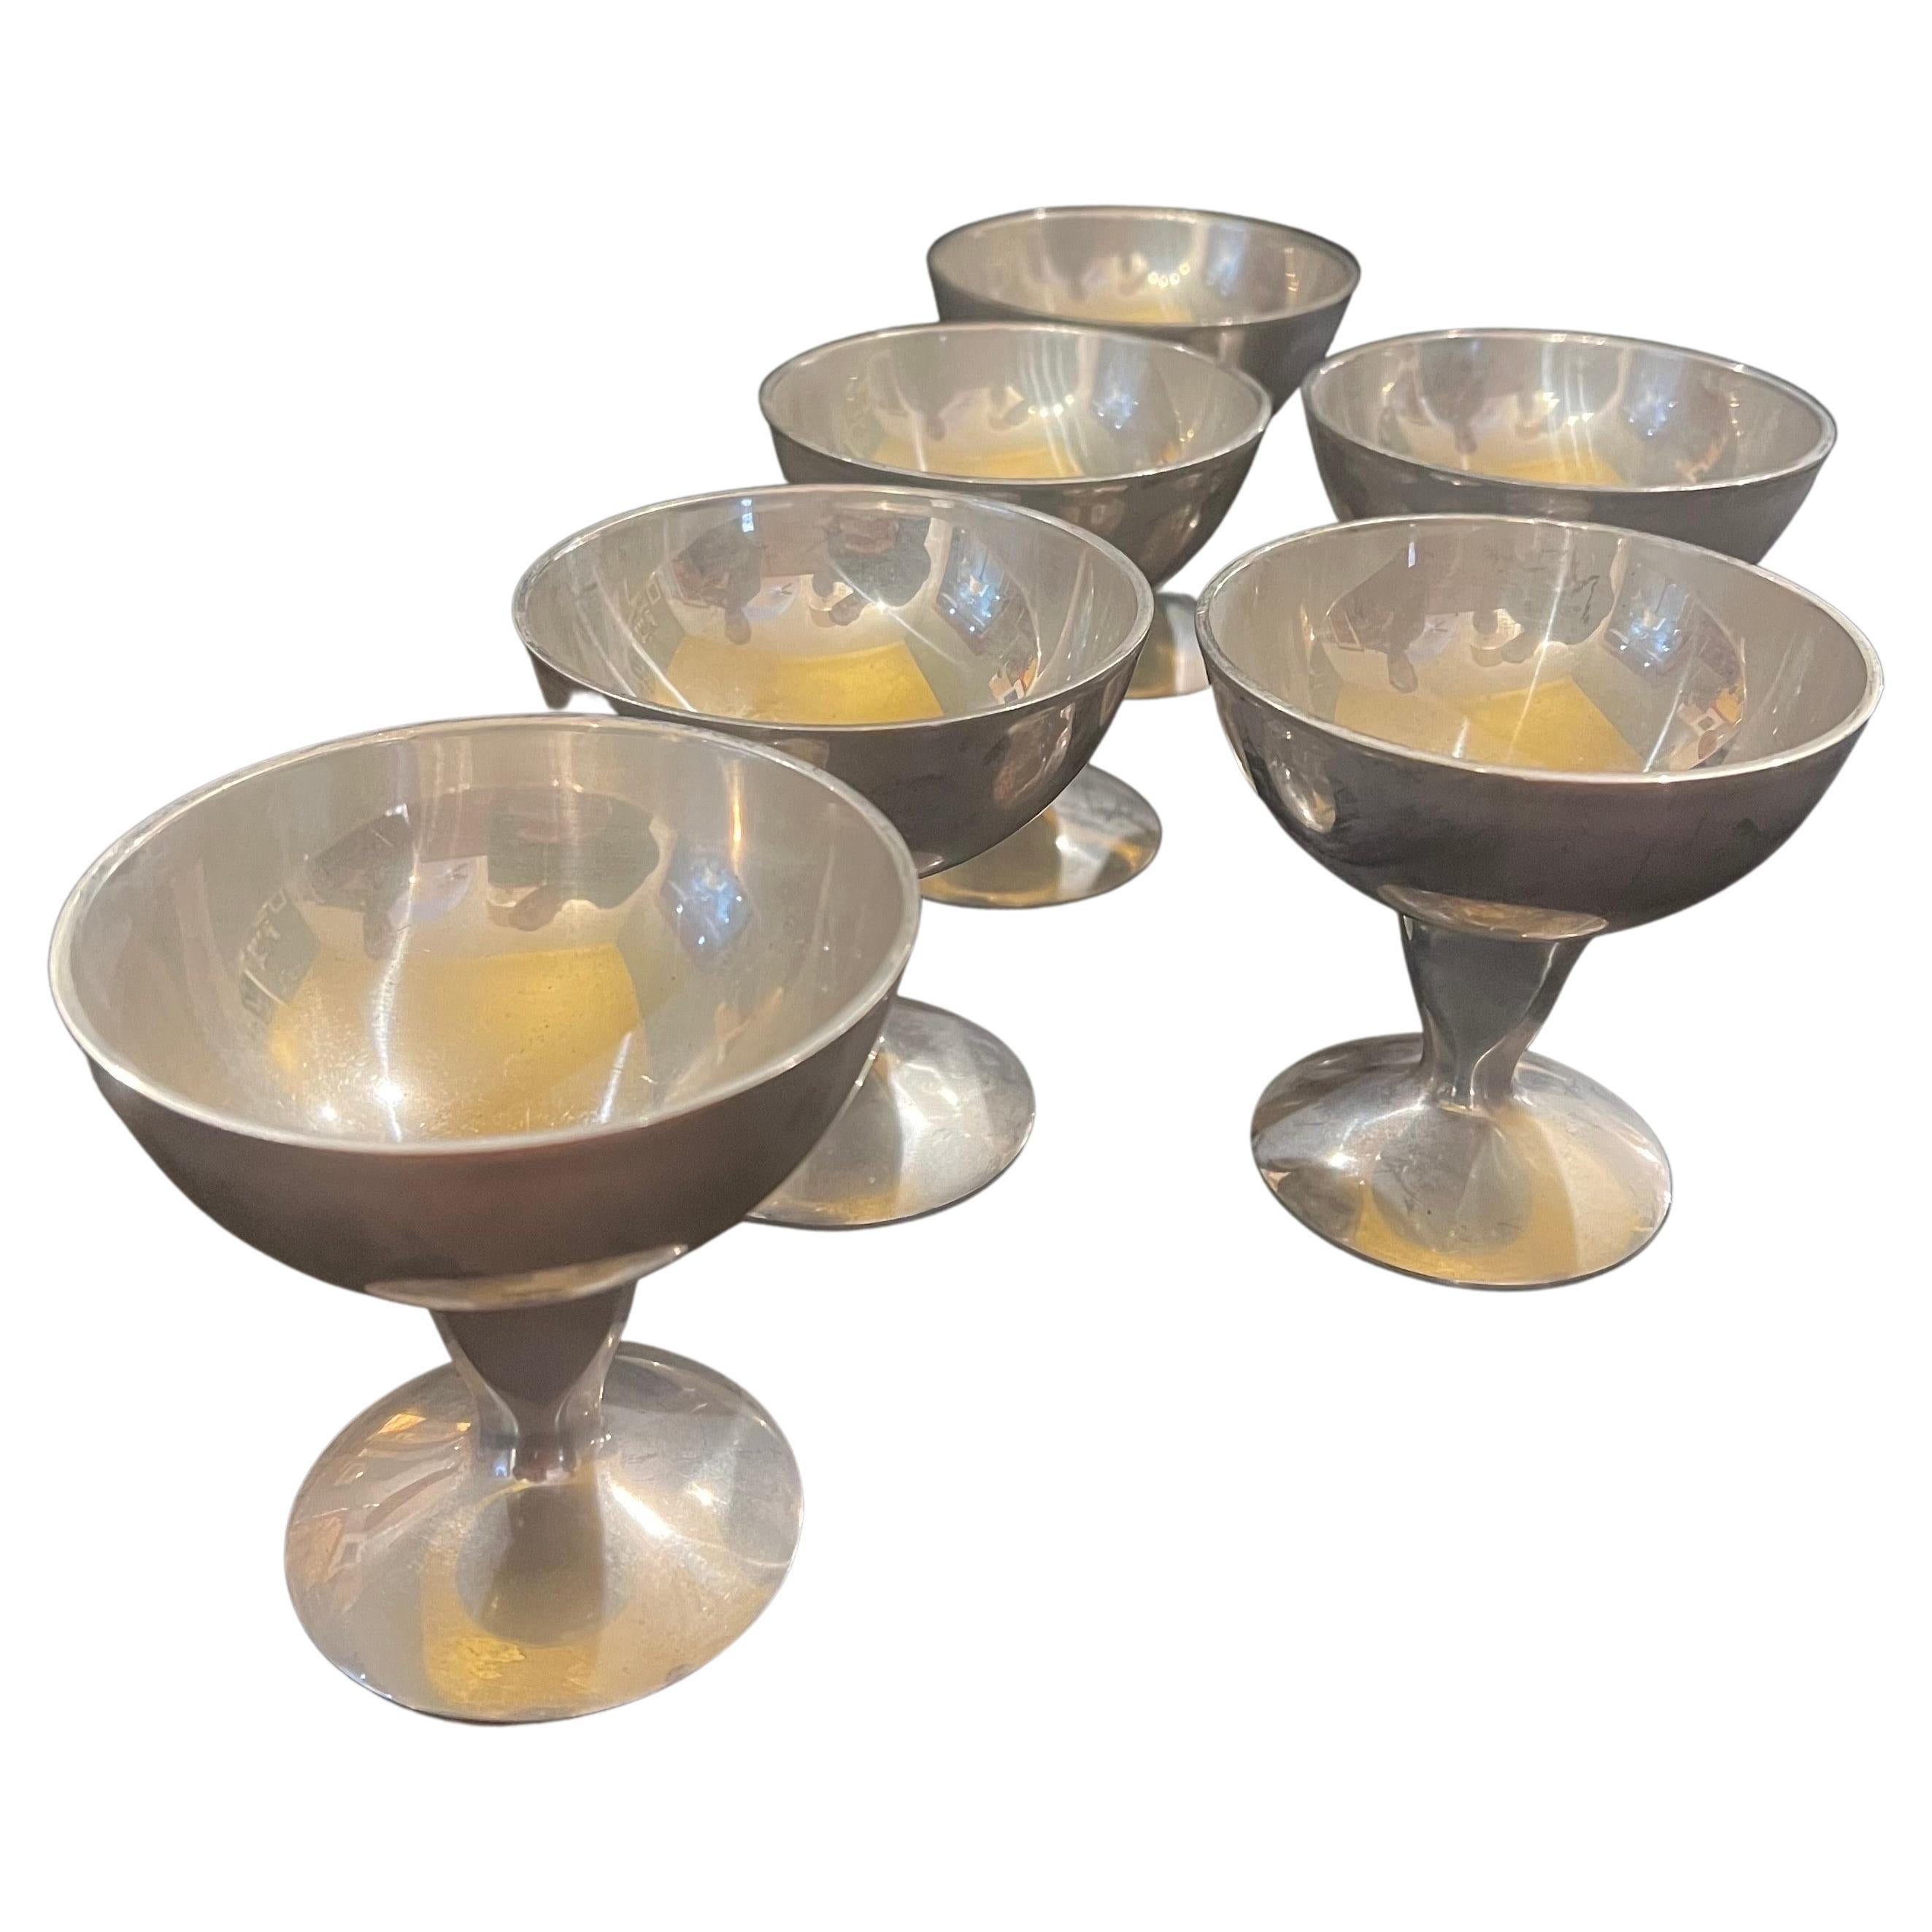 Great set of 6 polished aluminum dessert ice cream cups,great design beautiful condition by Harvey circa 1950s.